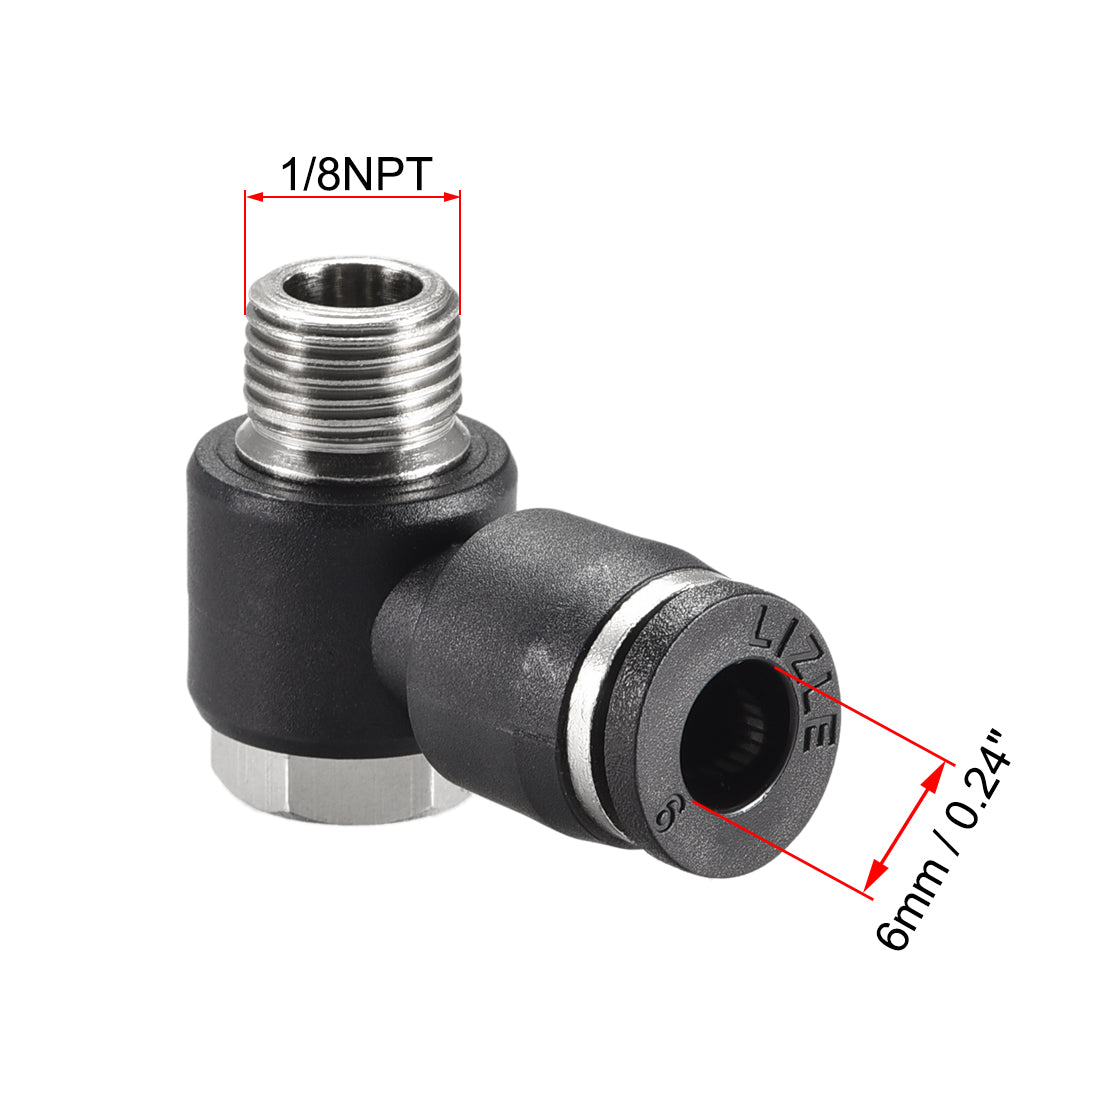 uxcell Uxcell Pneumatic Push to Connect Tube Fitting 6mm Tube to 1/8NPT Male Thread Elbow 2Pcs